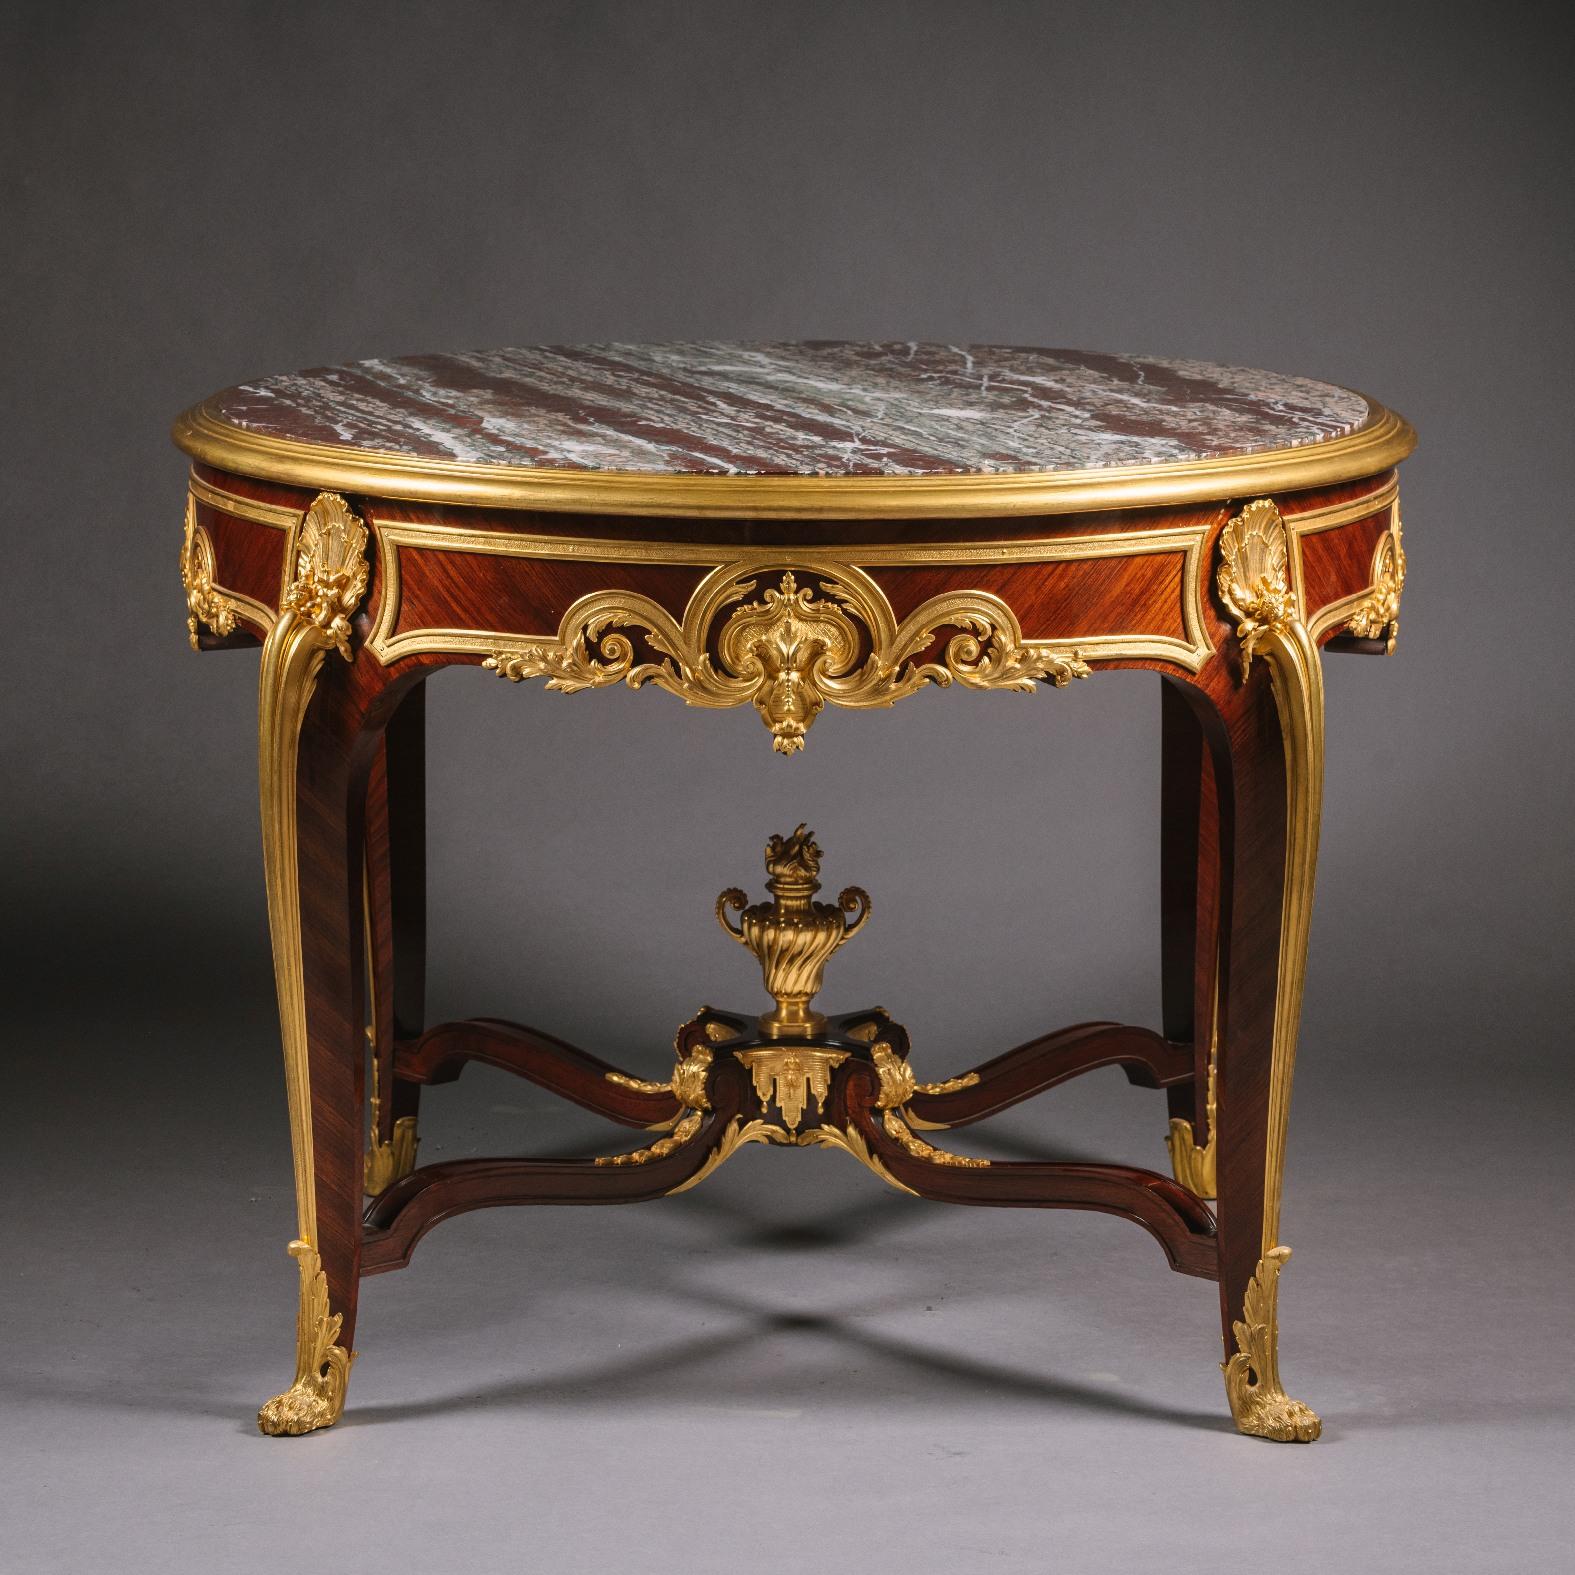 An important and rare gilt-bronze, mahogany and Bois Satiné centre table, with campan rubané marble top. By François Linke.
Linke index number 1103.
The gilt bronze on the stretcher variously incised and numbered 'FL/5842'
The circular top inset